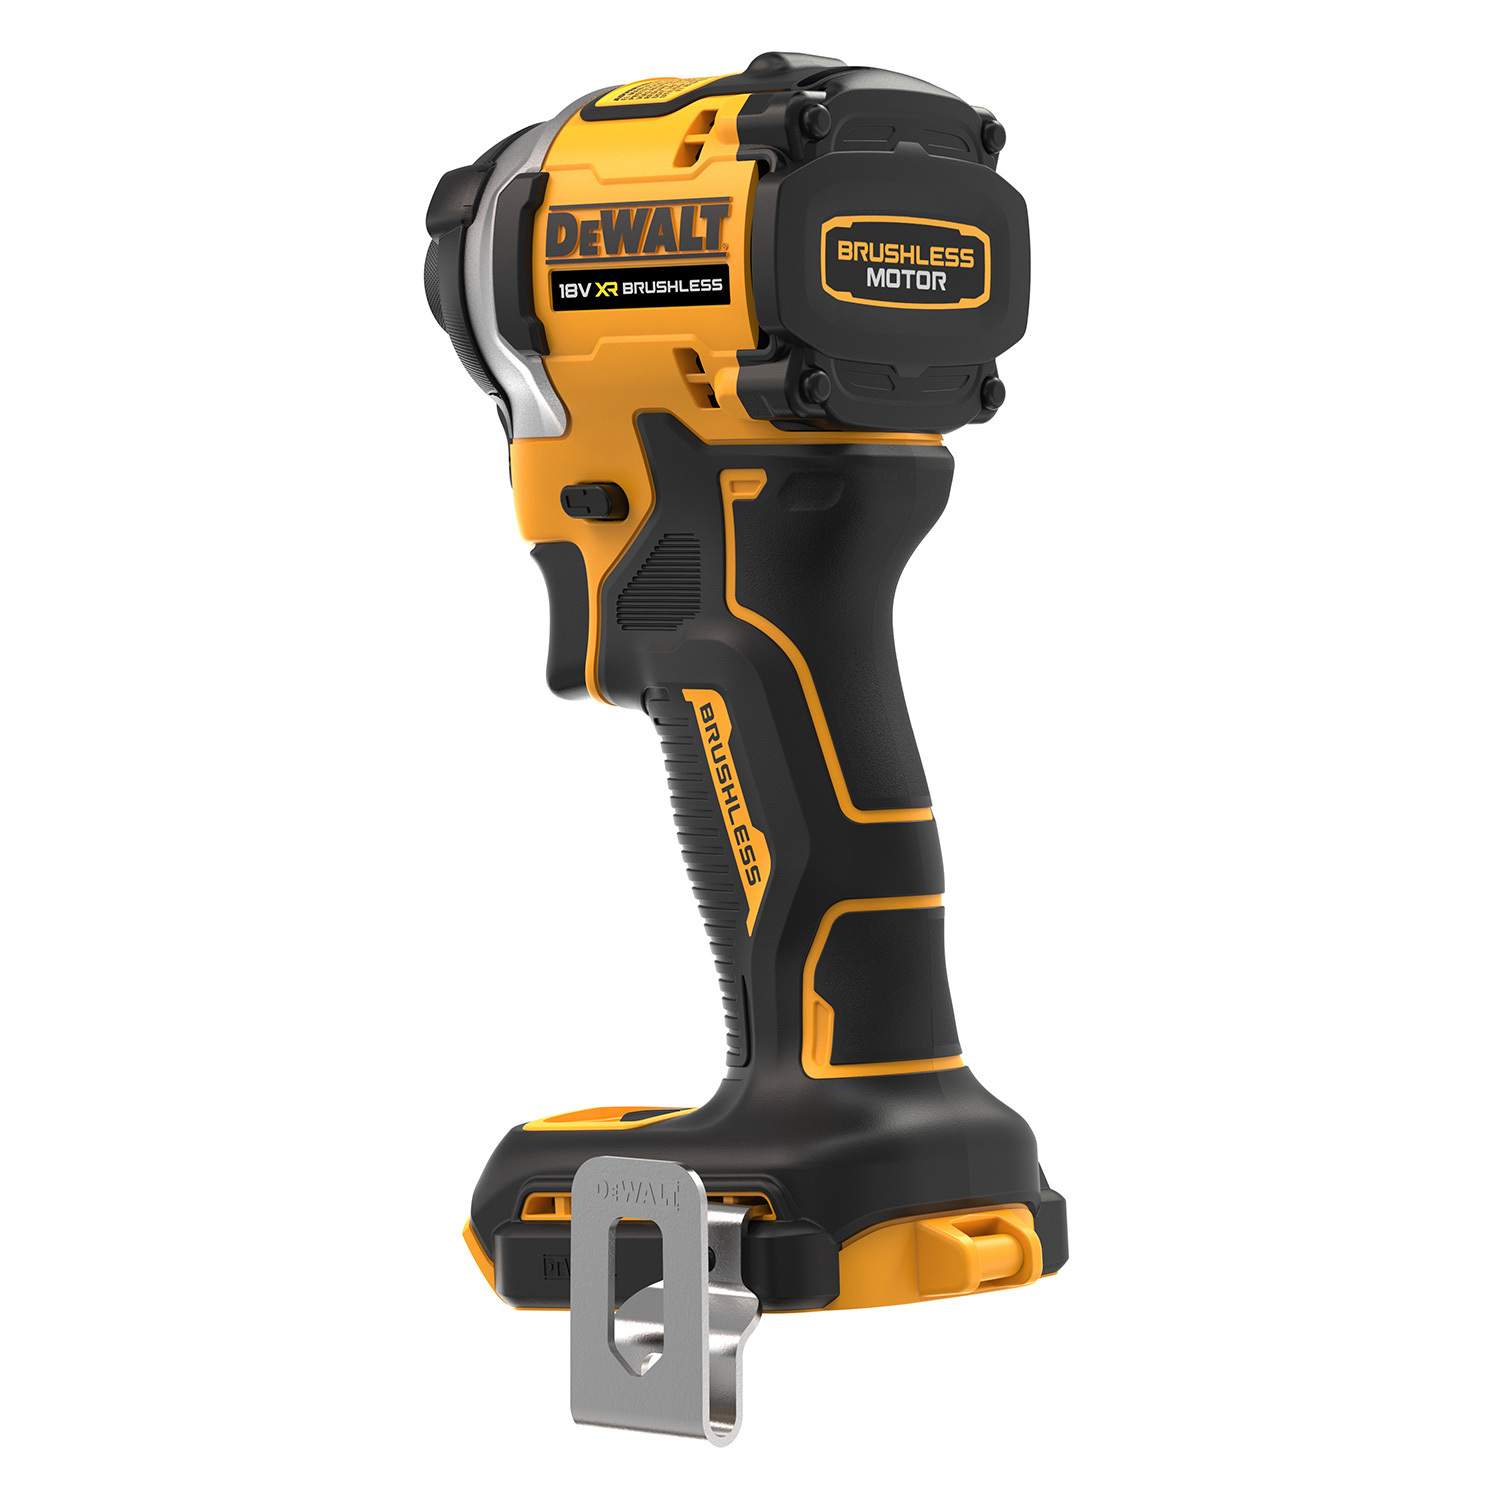 DeWalt 18V Compact 3 Speed Impact Driver (tool only) DCF850N-XJ